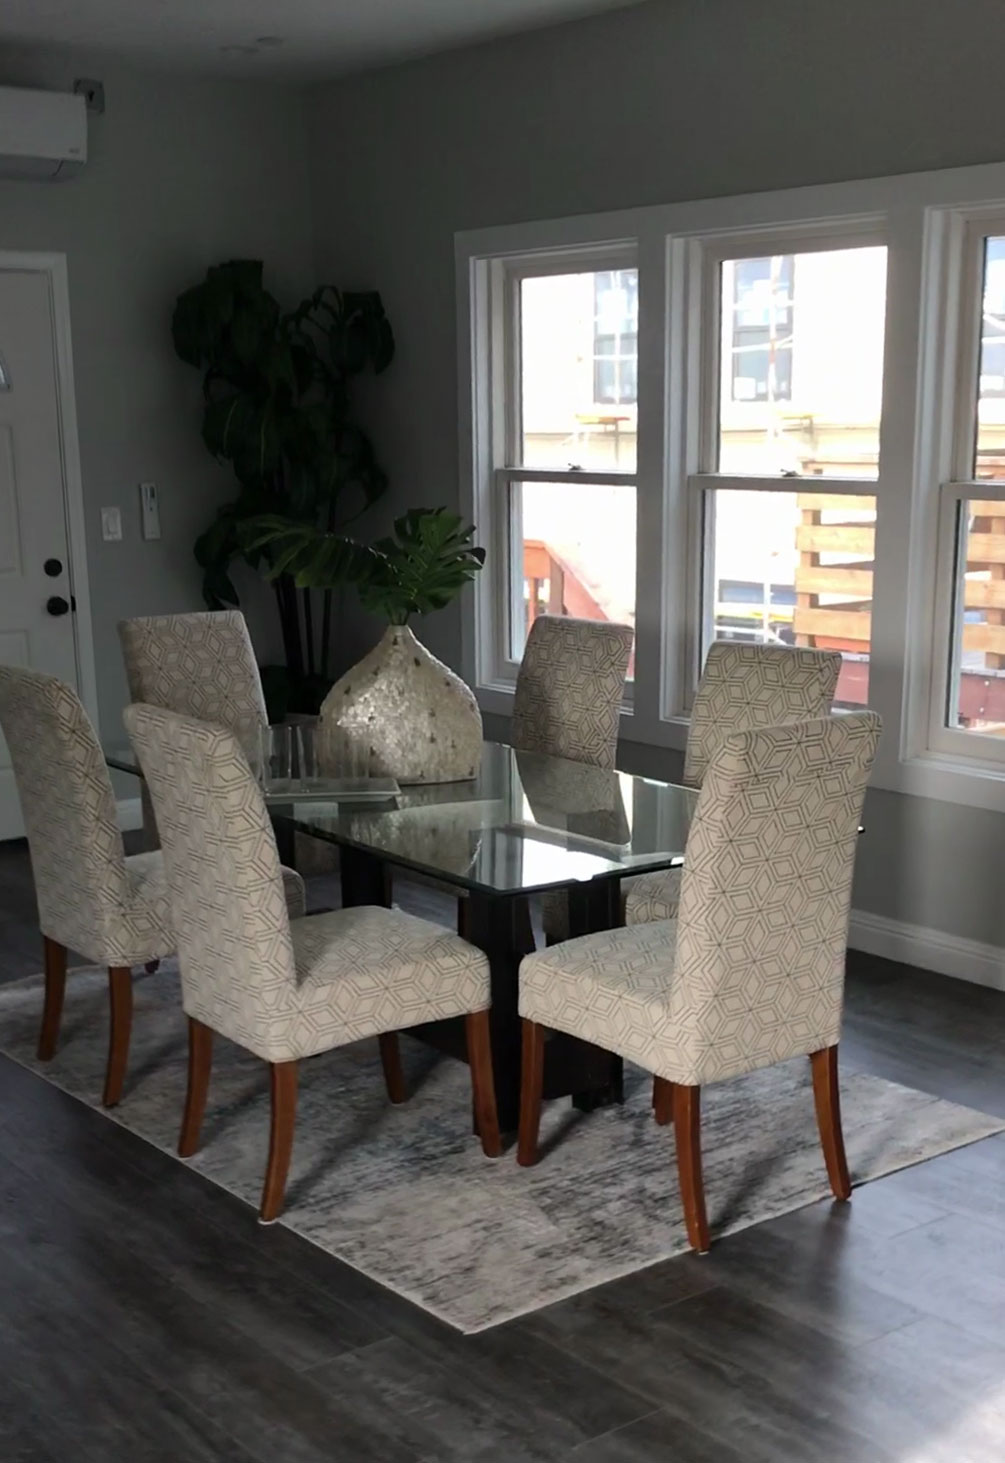 Glass dining room table with modern chairs and monstera plant installed in detached rental property